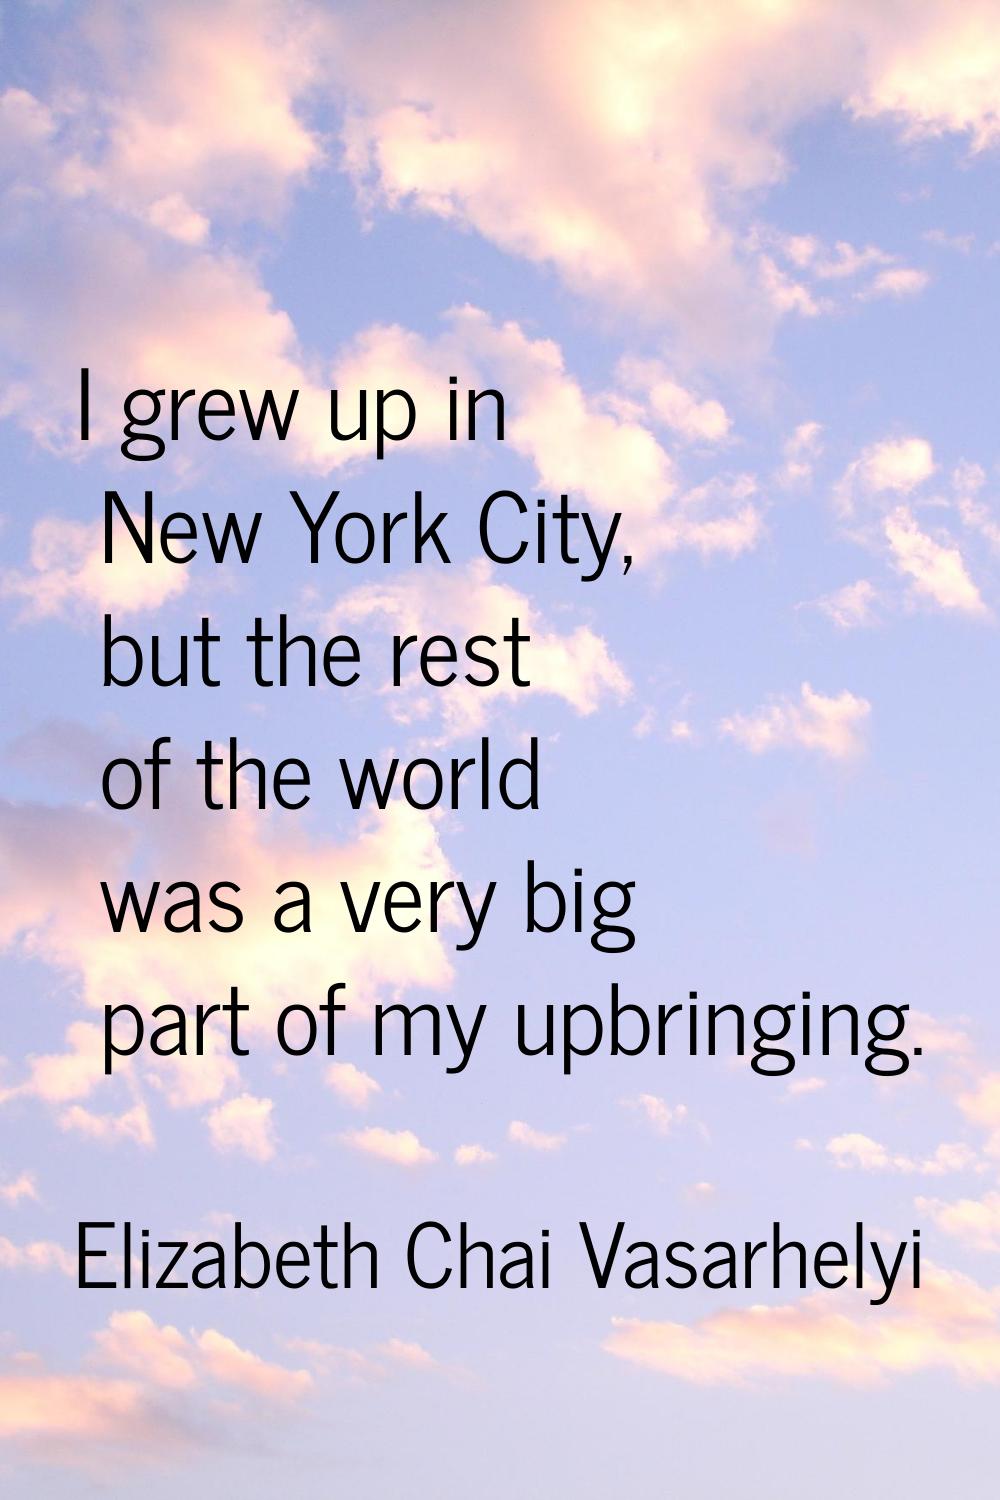 I grew up in New York City, but the rest of the world was a very big part of my upbringing.